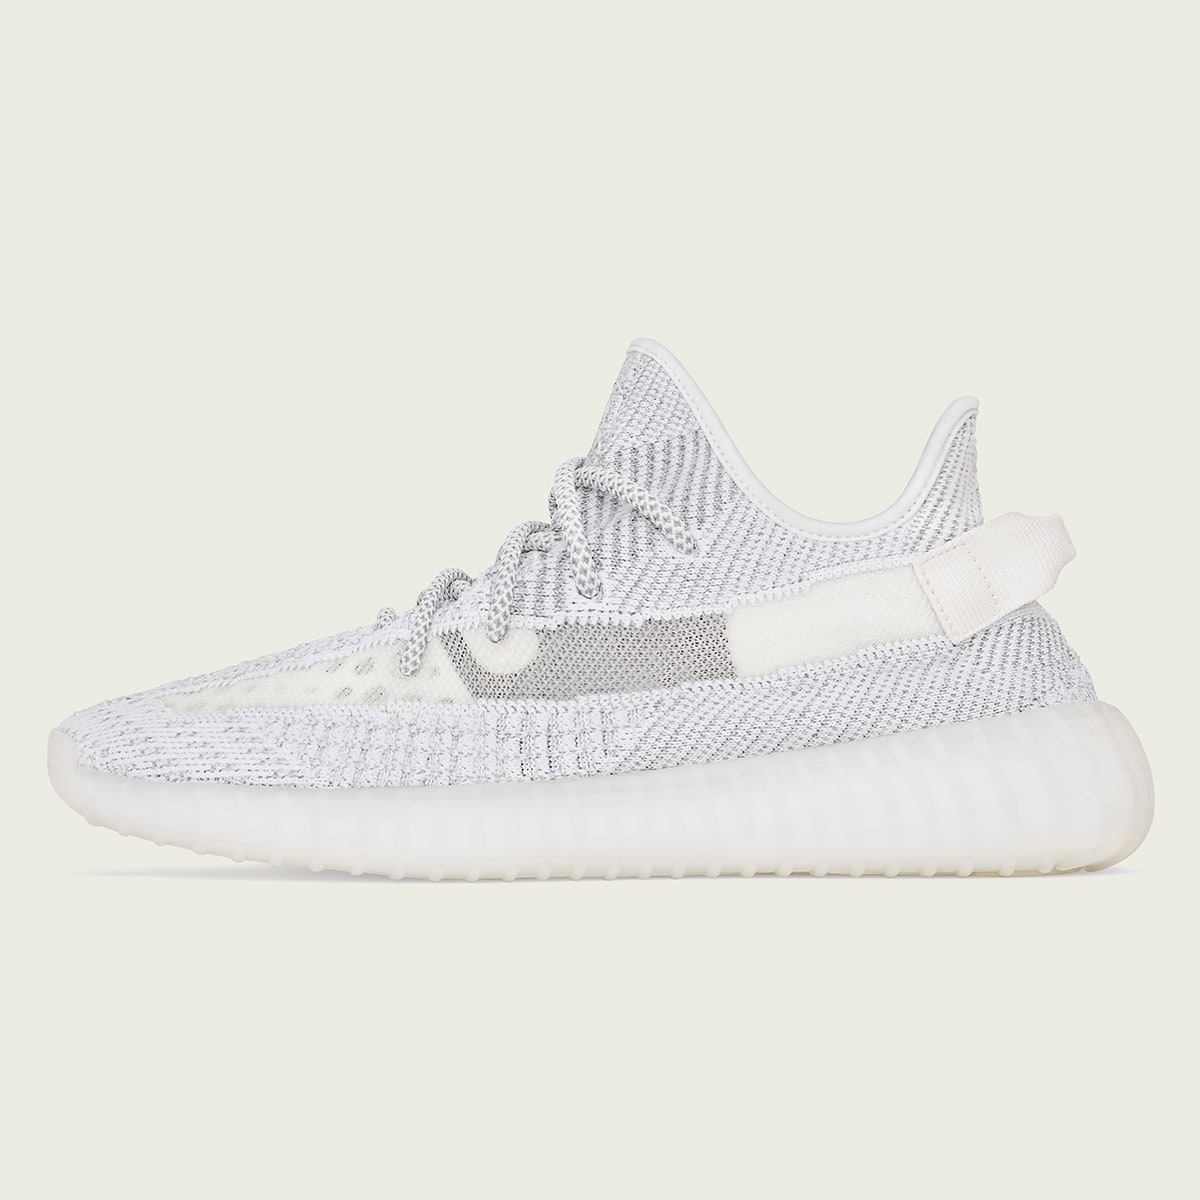 Adidas Yeezy Boost 350 V2 (Static) | END. Launches